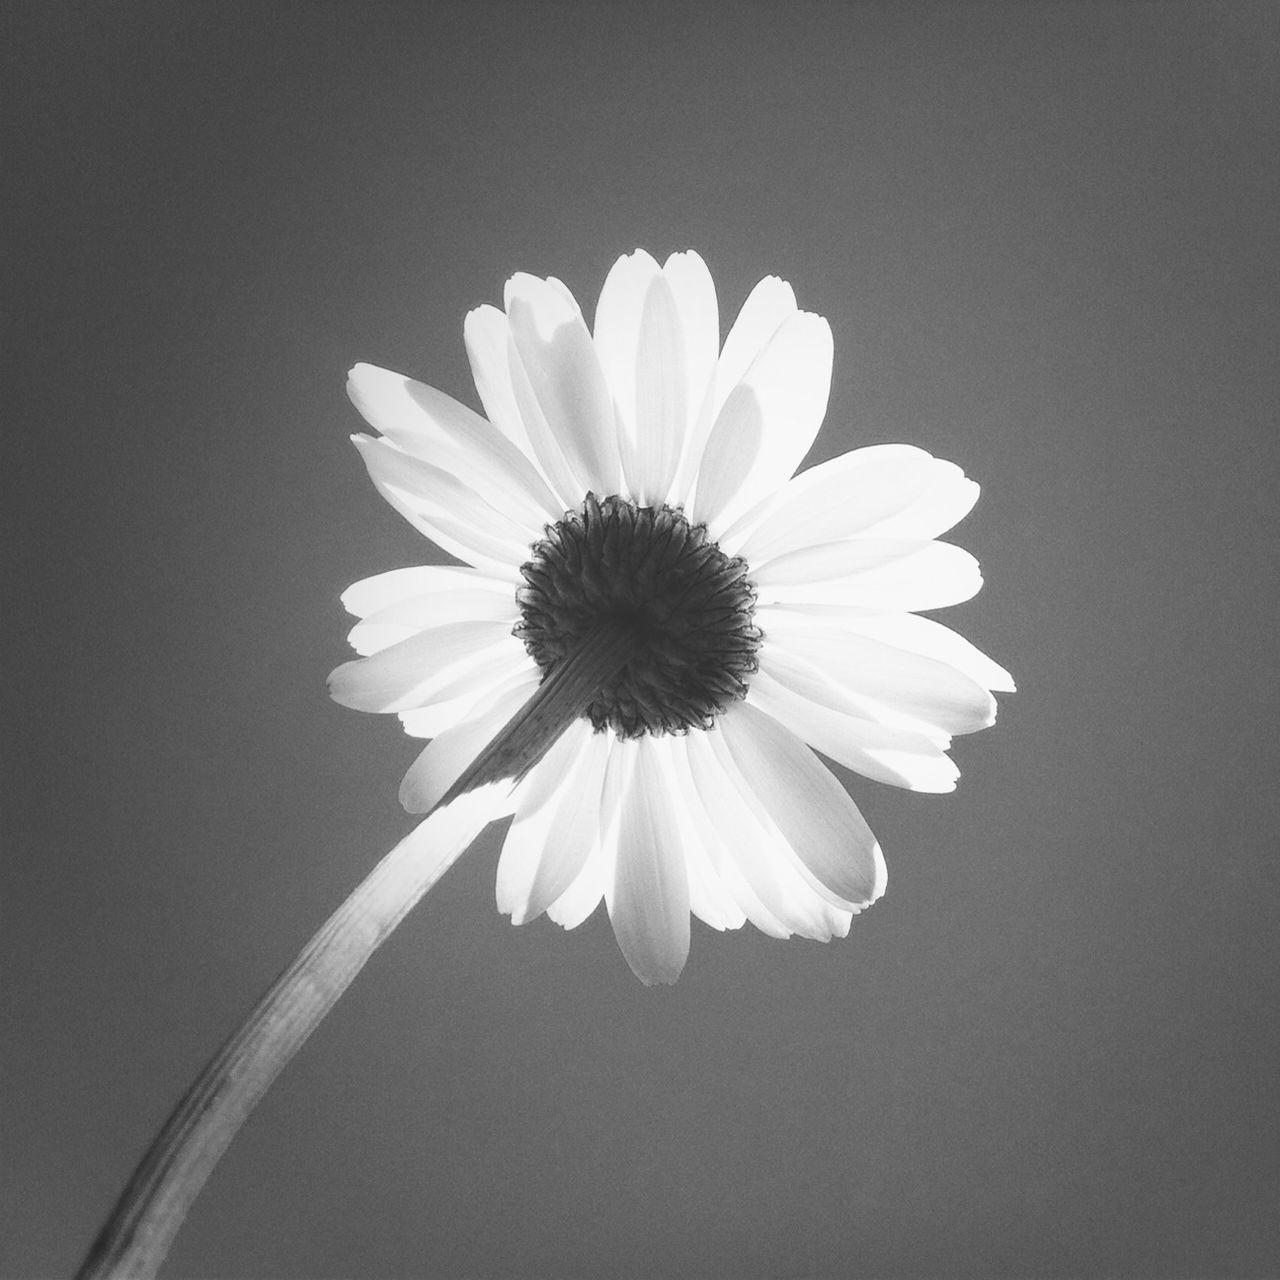 flower, petal, freshness, flower head, fragility, studio shot, single flower, beauty in nature, white color, close-up, copy space, nature, growth, pollen, blooming, daisy, black background, white, no people, blossom